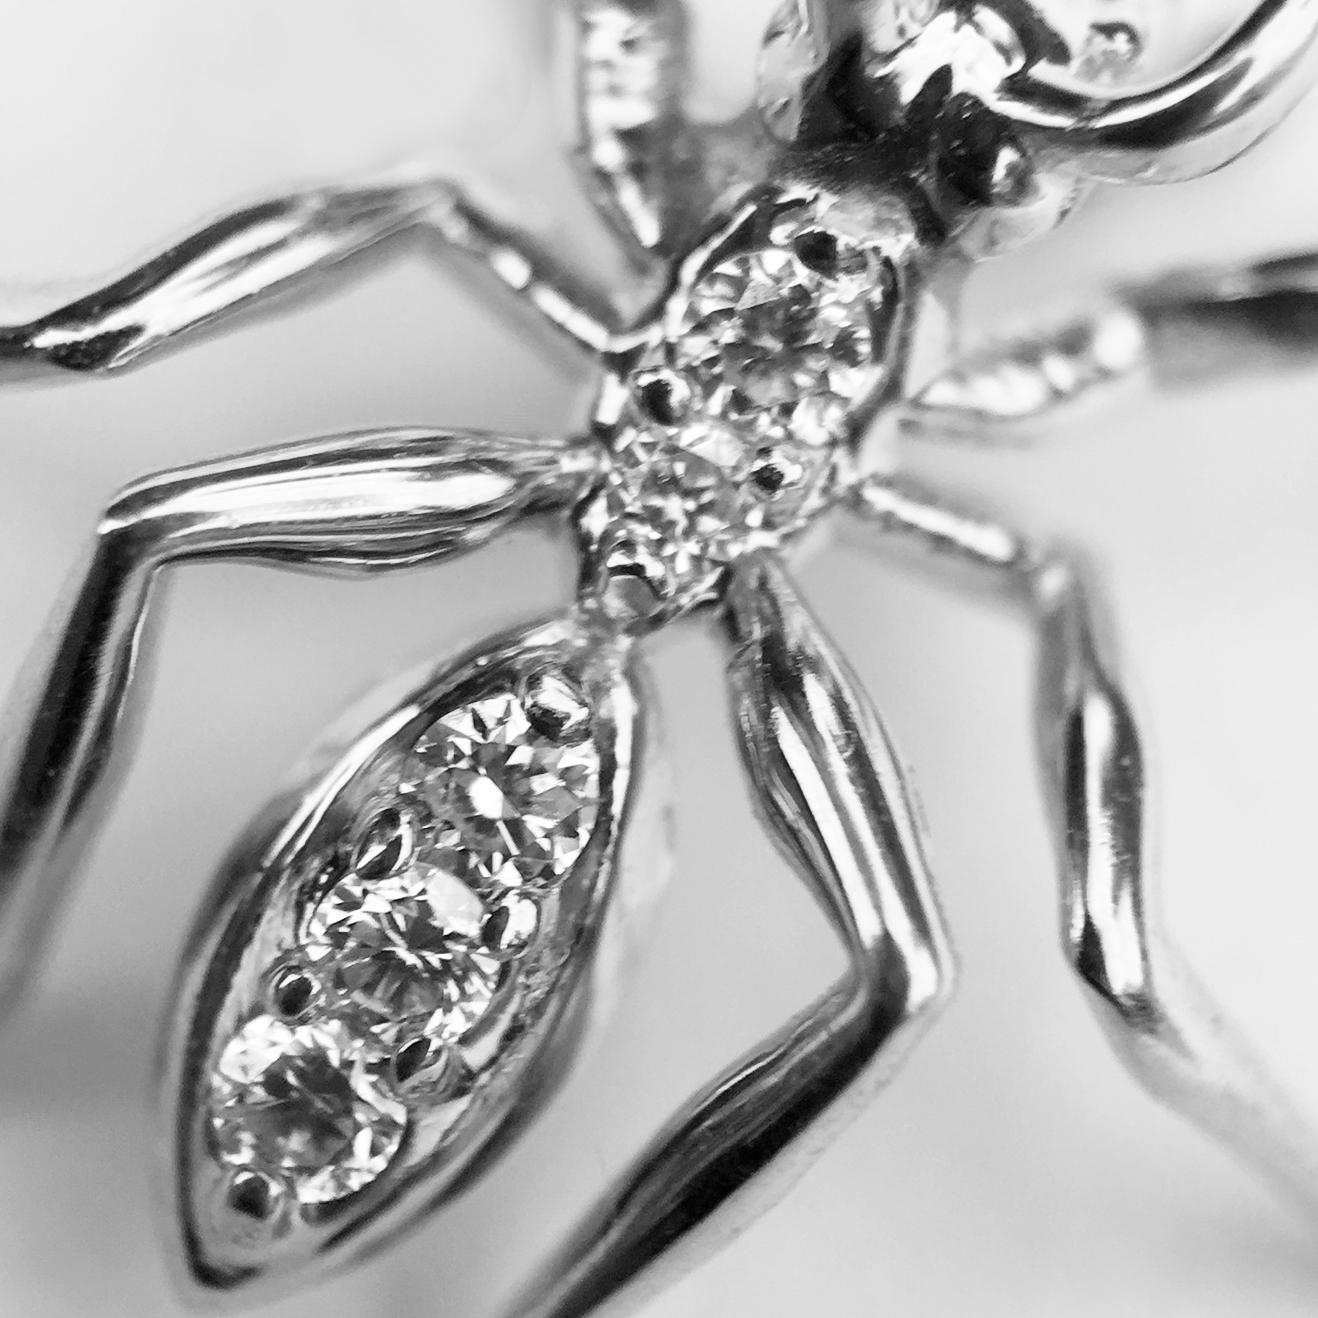 Make a statement with this sophisticated Ant Tie Tack. Crafted in 14k white gold and adorned with five brilliant-cut round diamonds pave set, this limited edition piece is the perfect addition to any formal or business attire. The ant design is 15mm